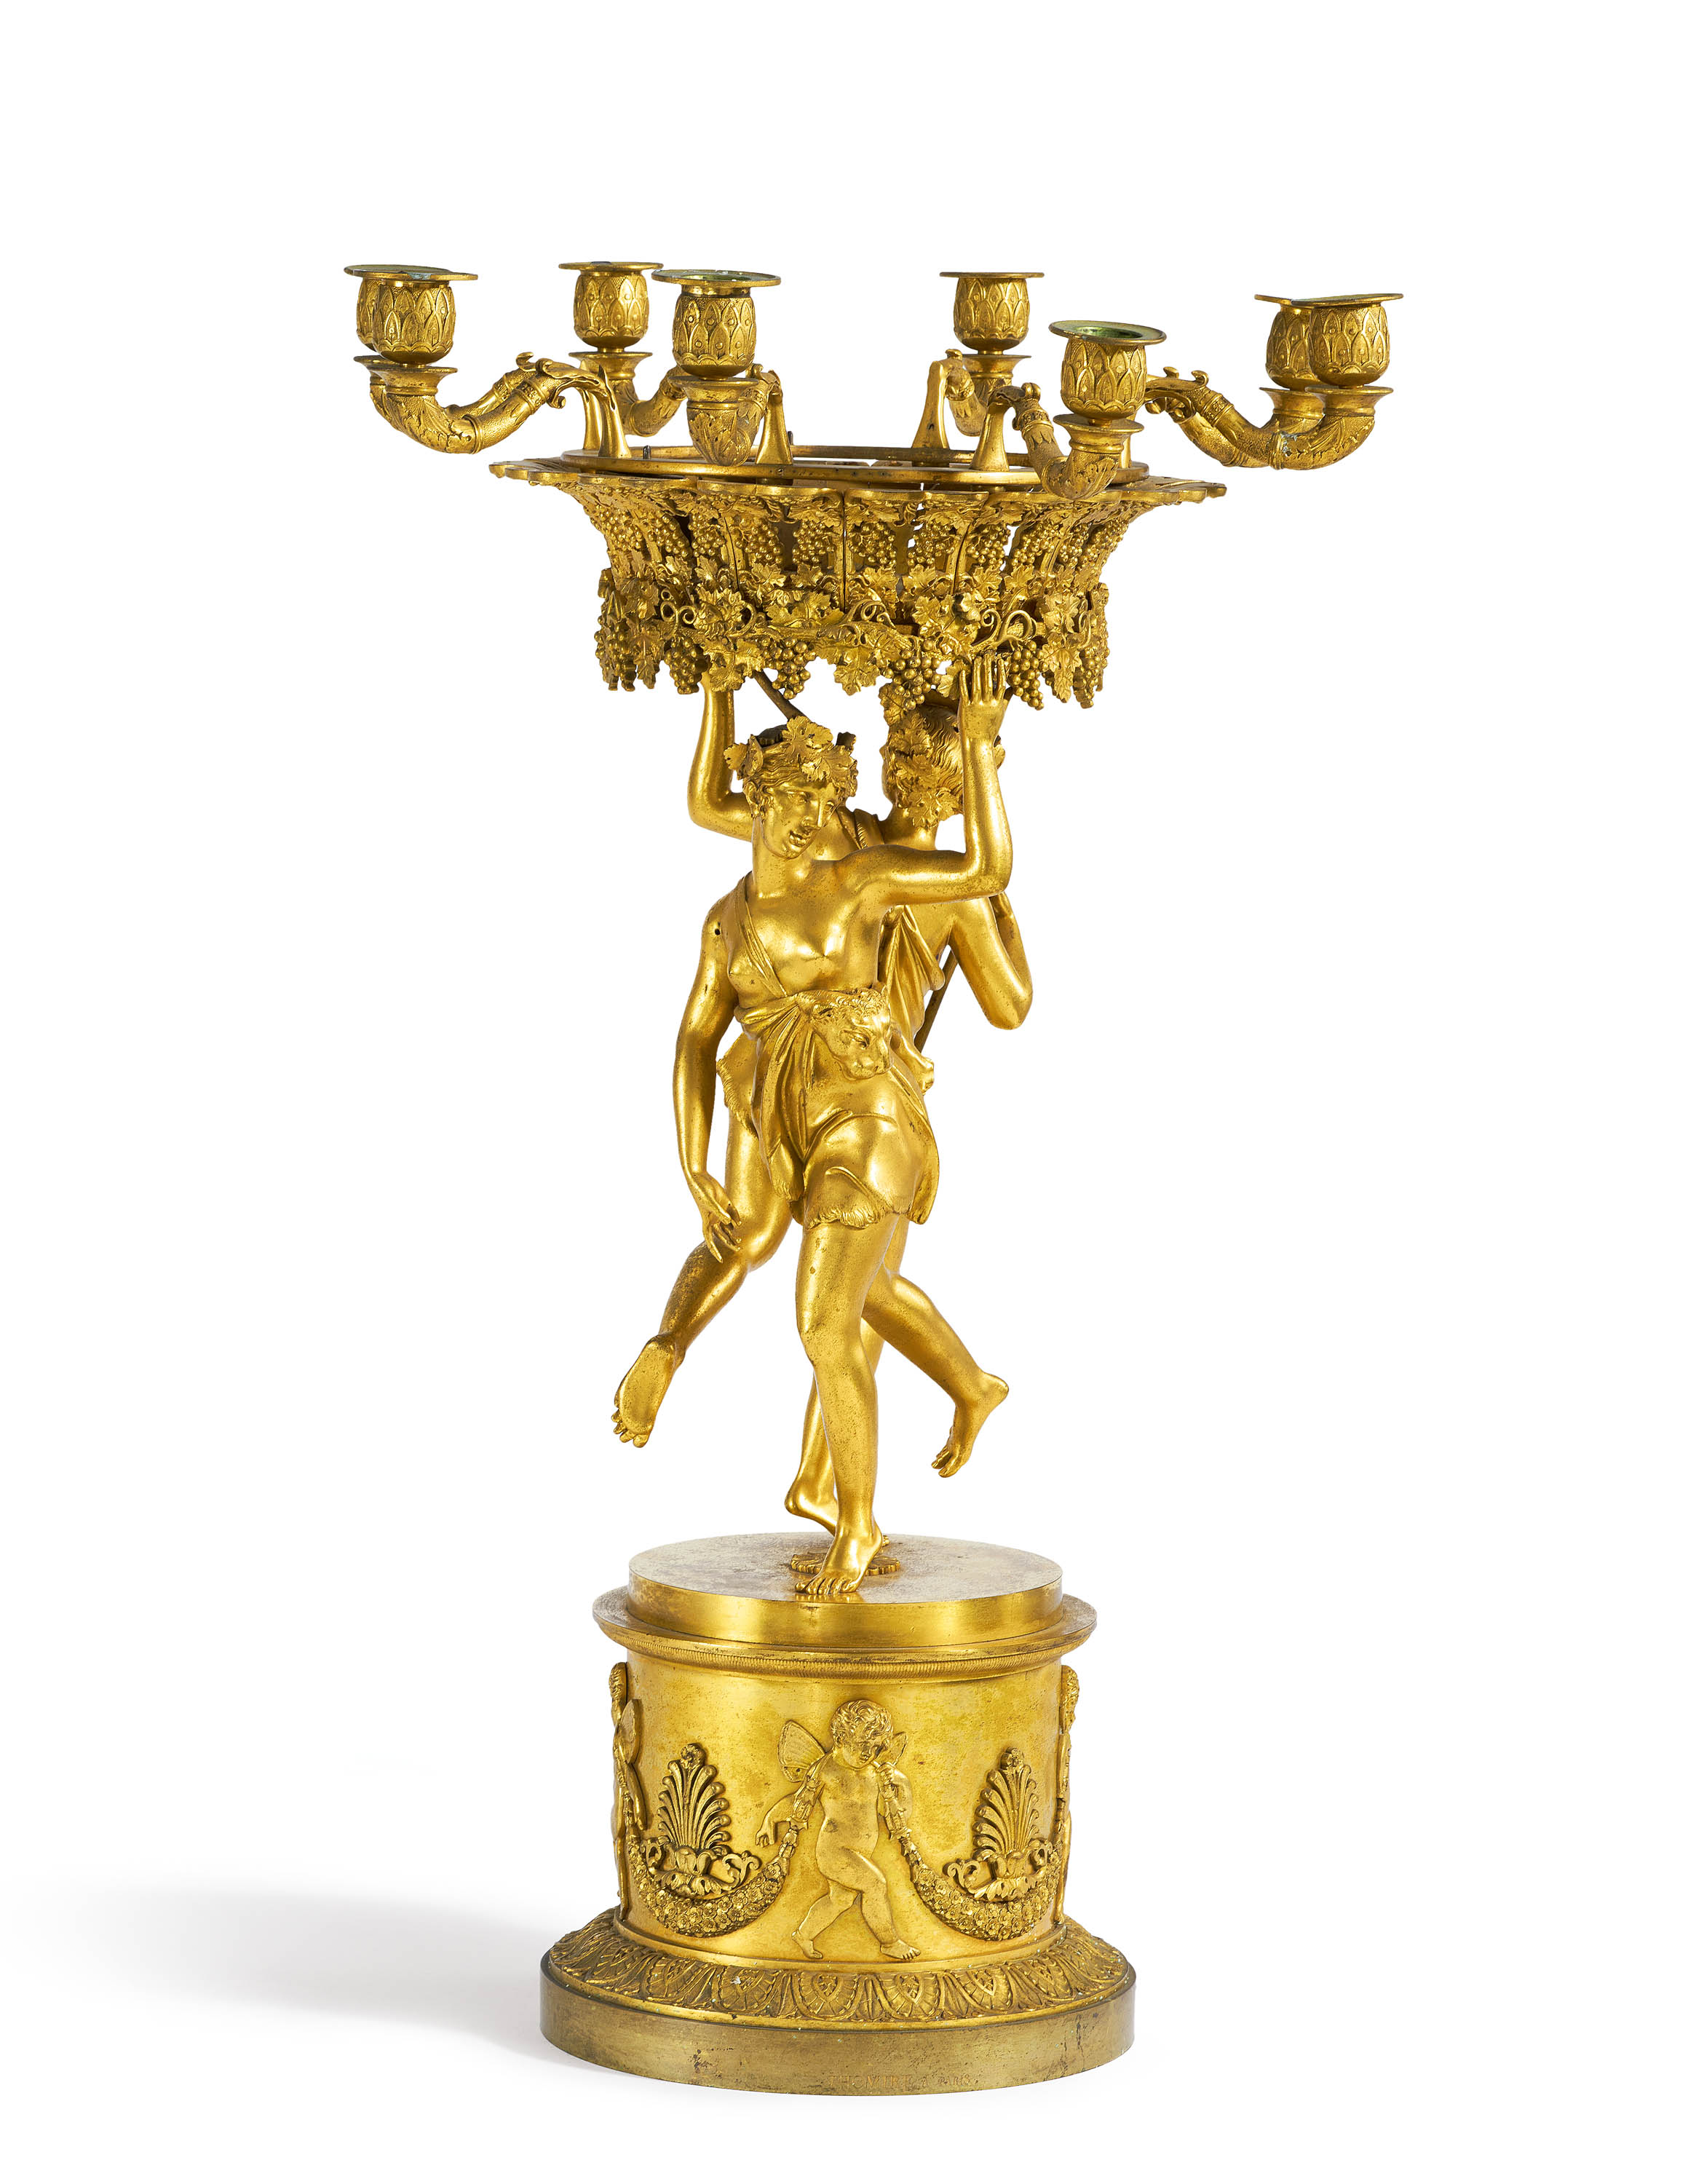 Large Empire centerpiece with Bacchus & Ceres - Image 3 of 4